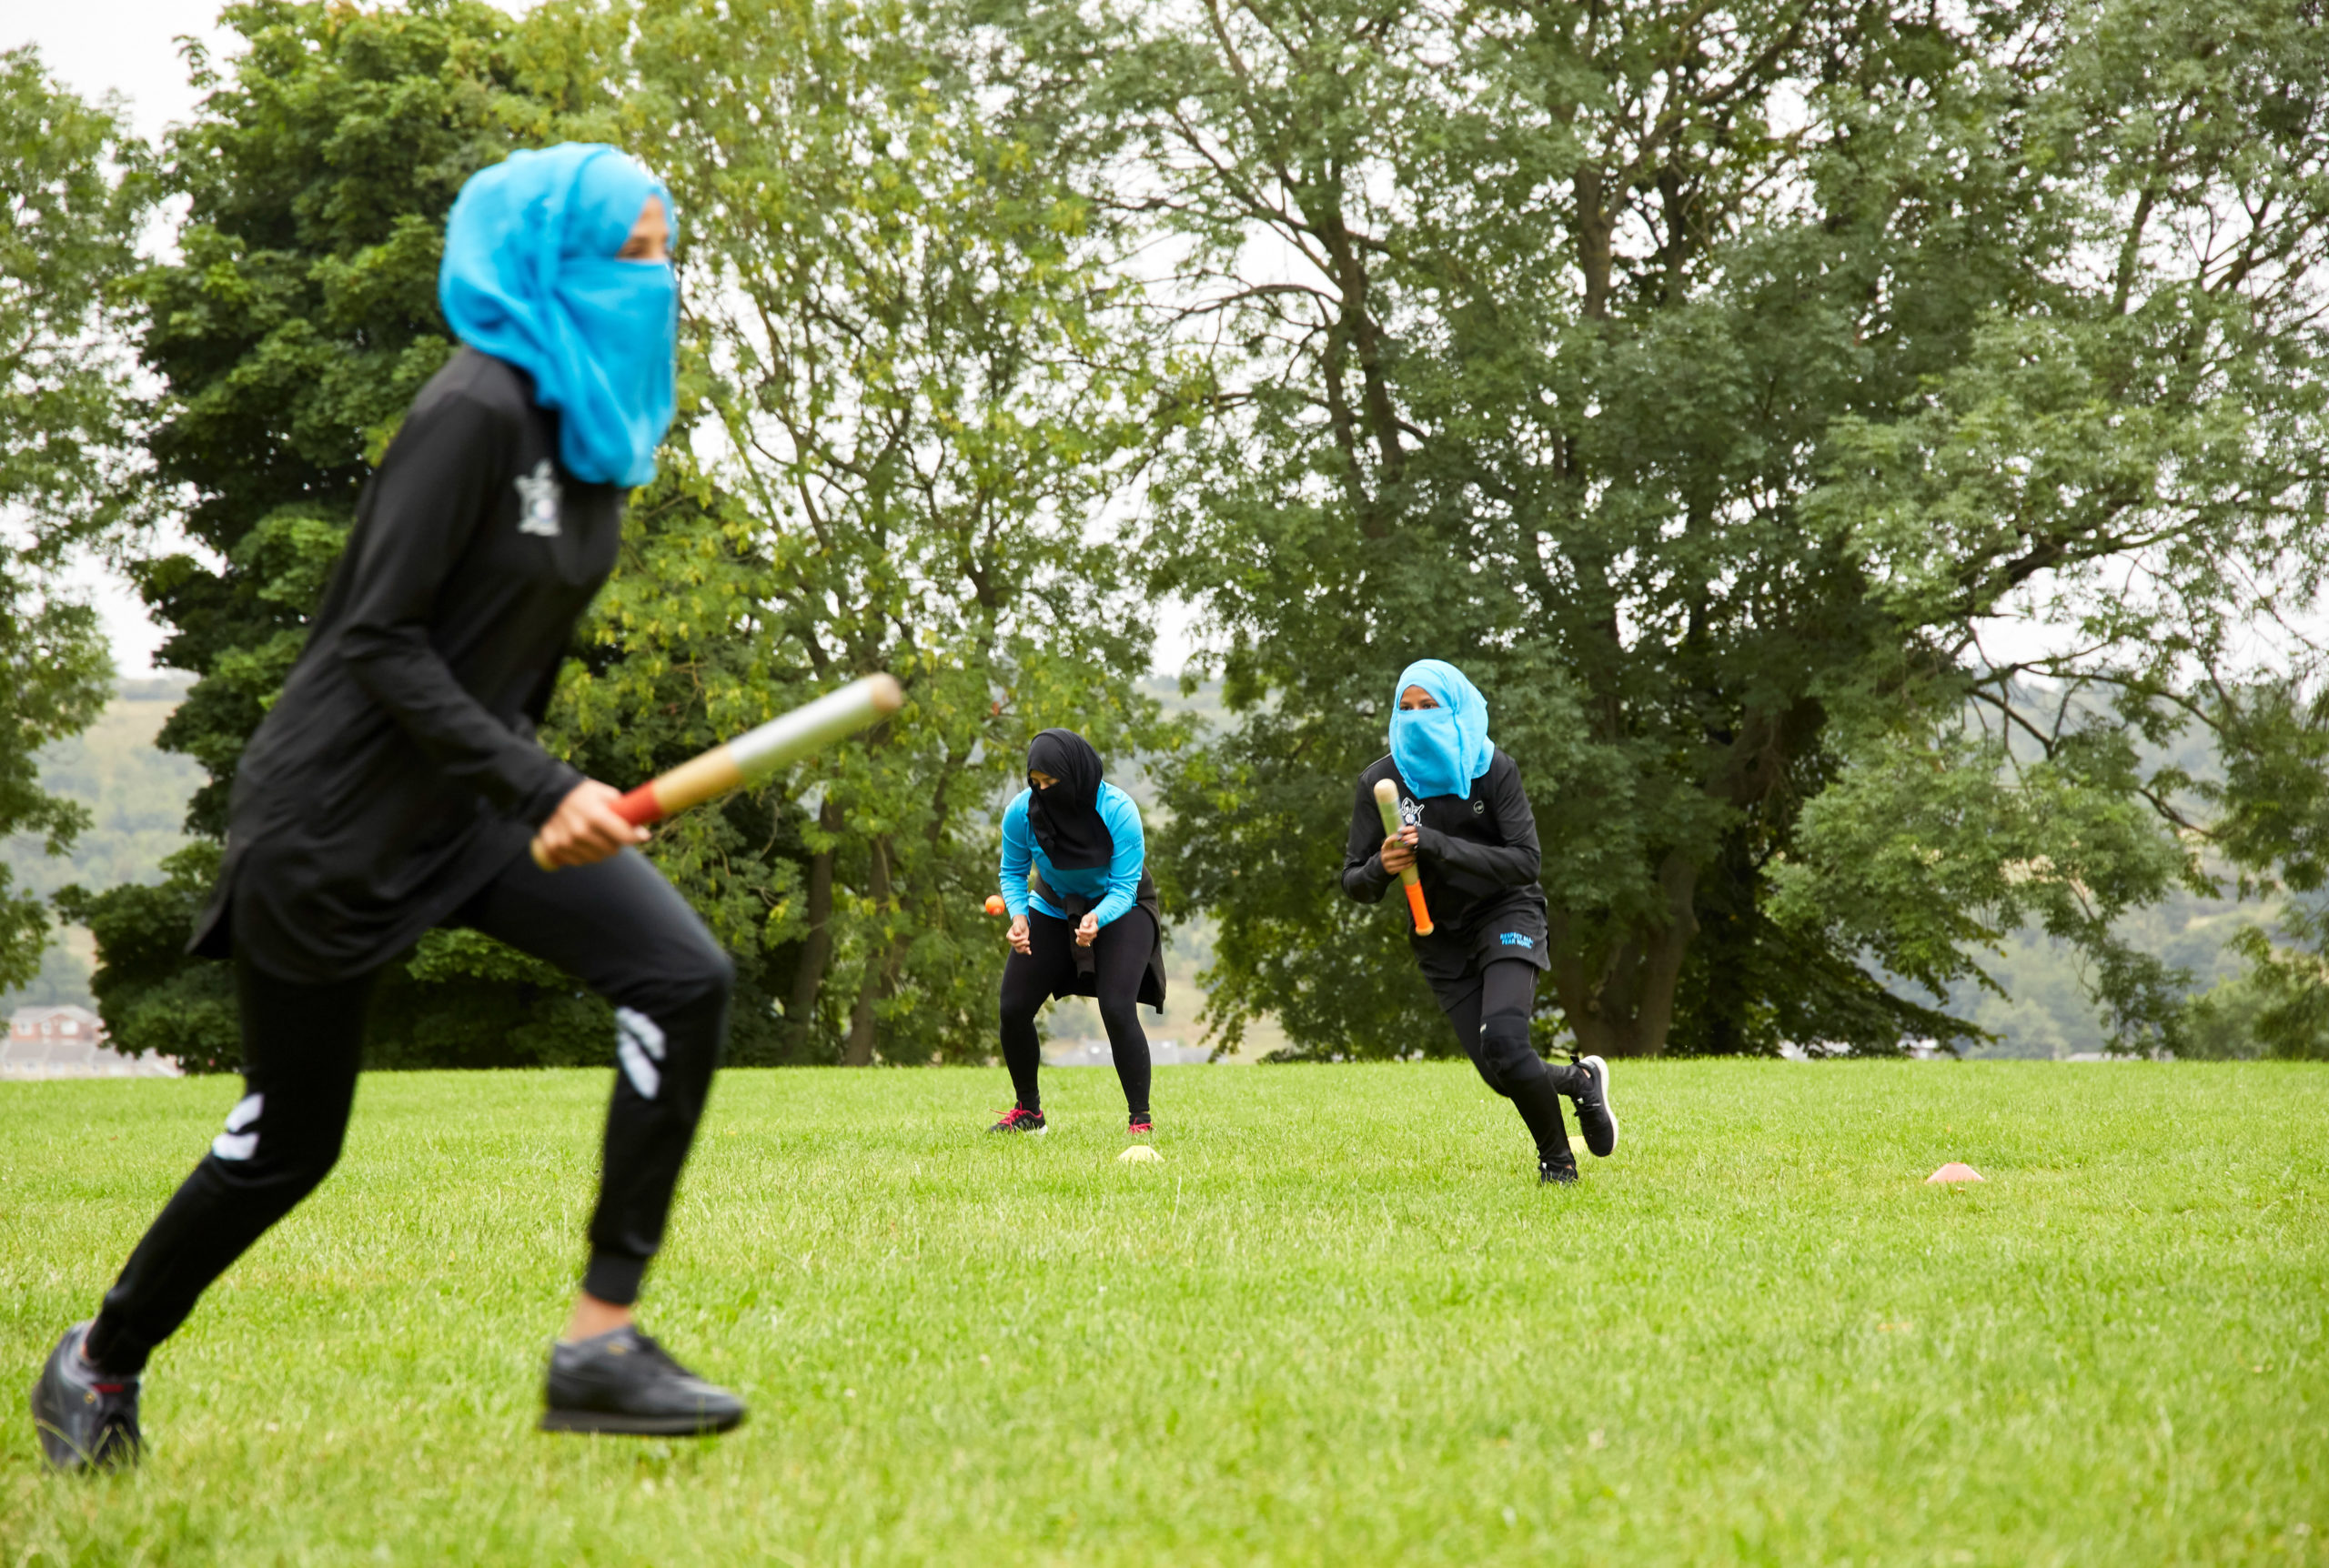 glorious batley ninjas playing rounders in the park